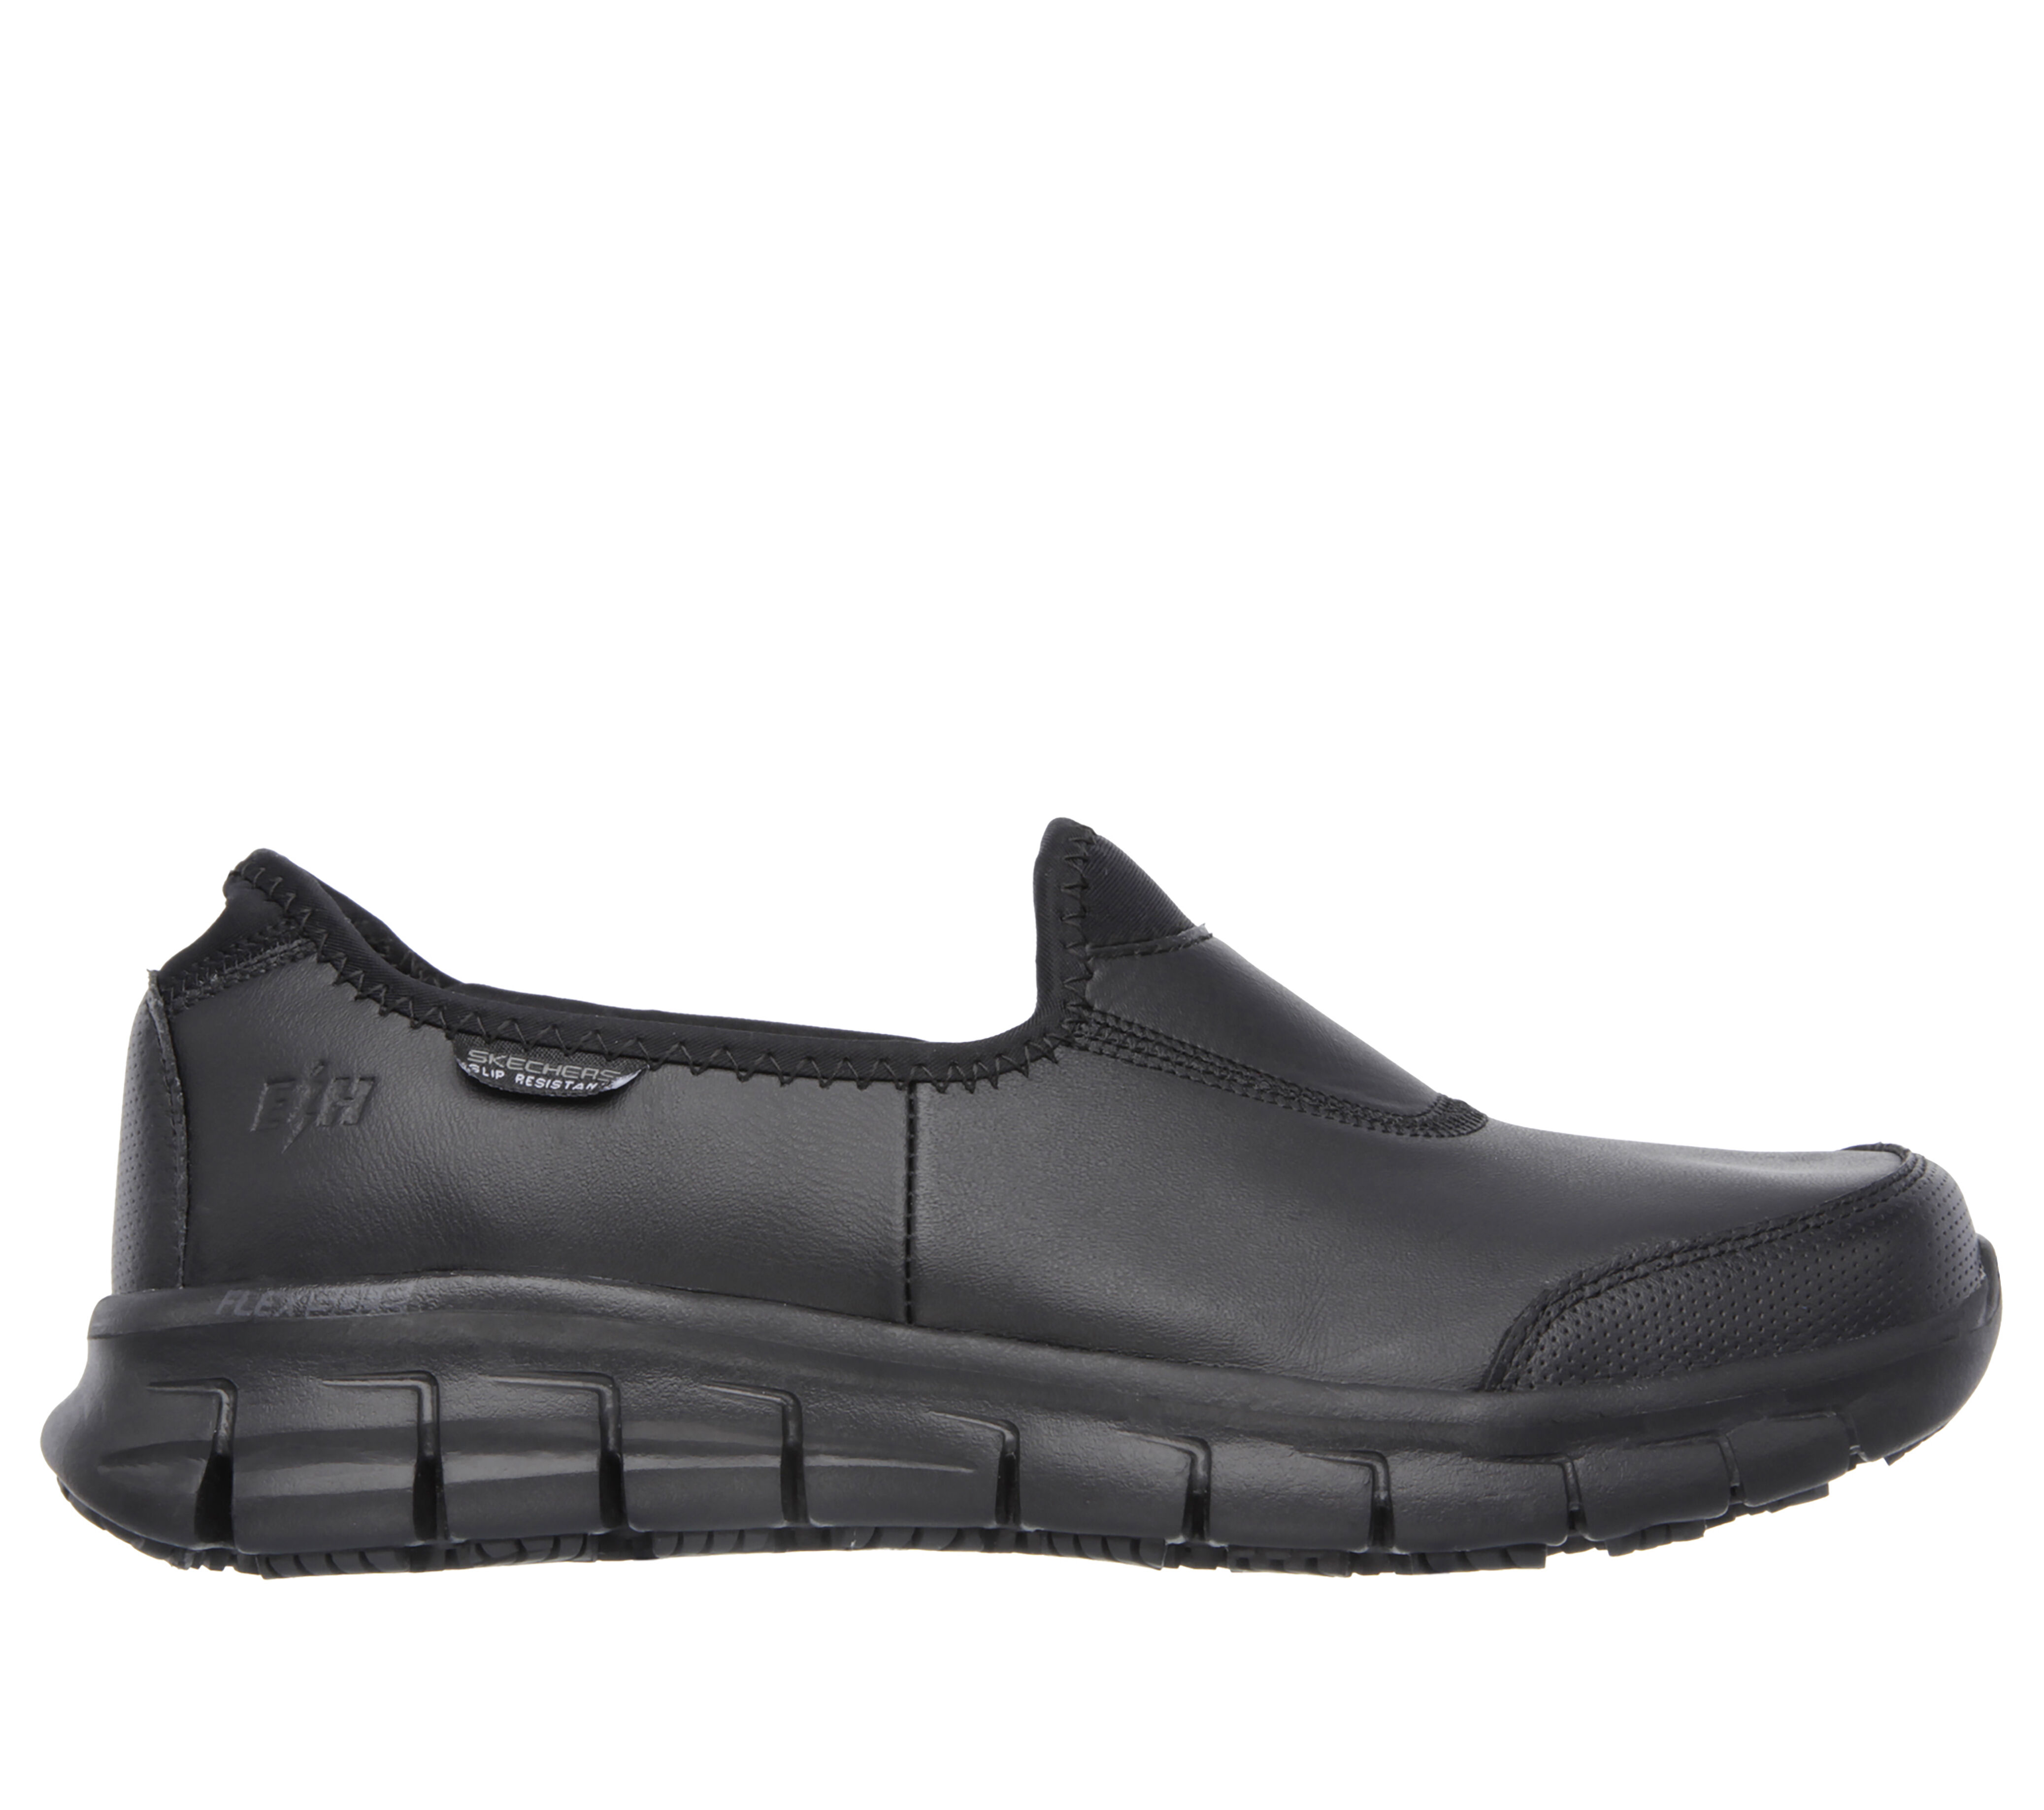 skechers black leather work shoes